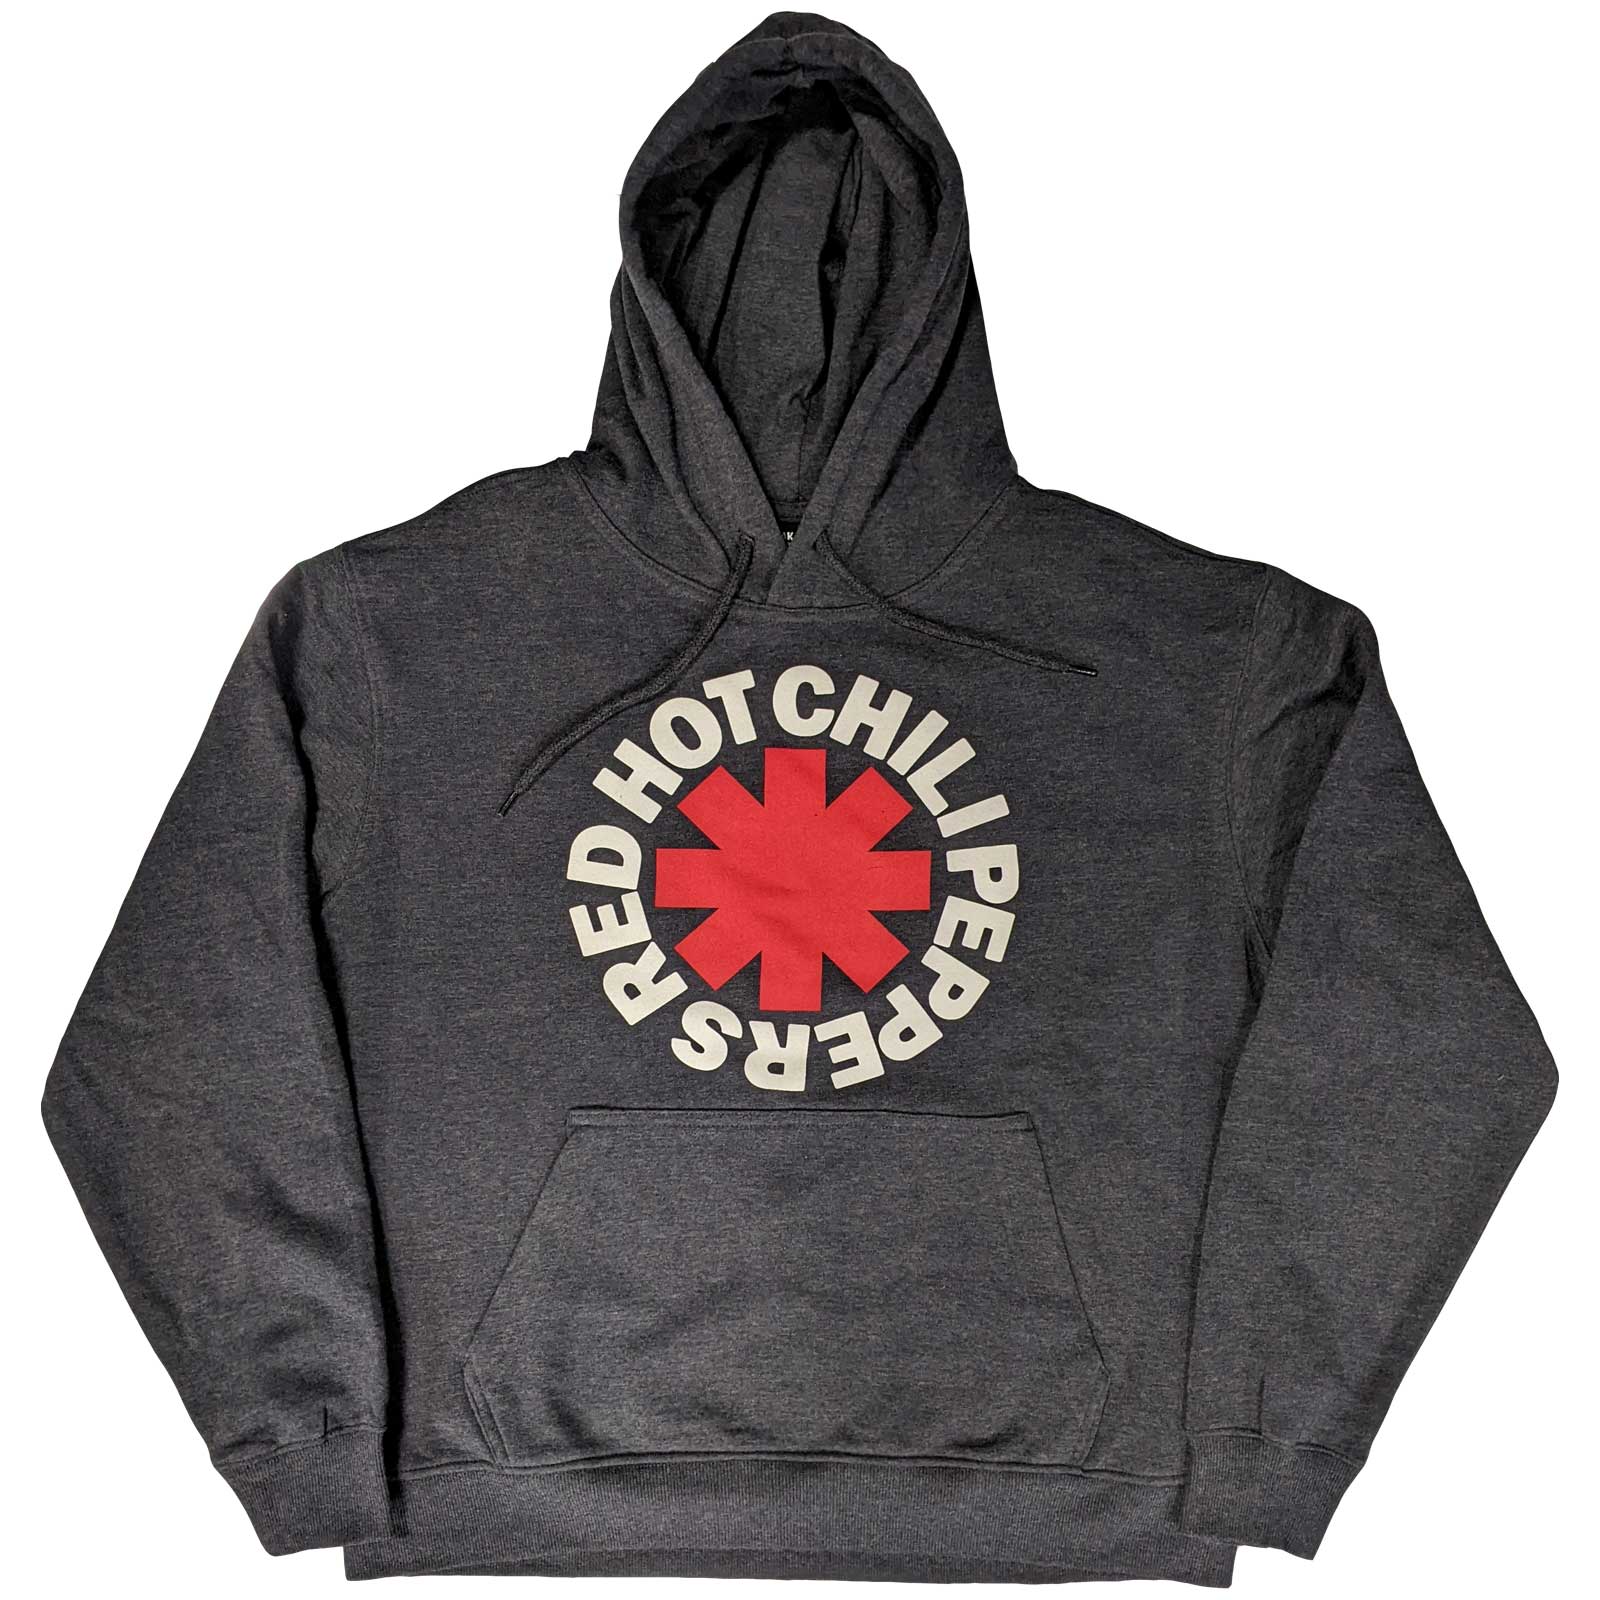 https://wildplanetmusic.com/product/red-hot-chili-pepperslogohoody-greyhdredhcp005/